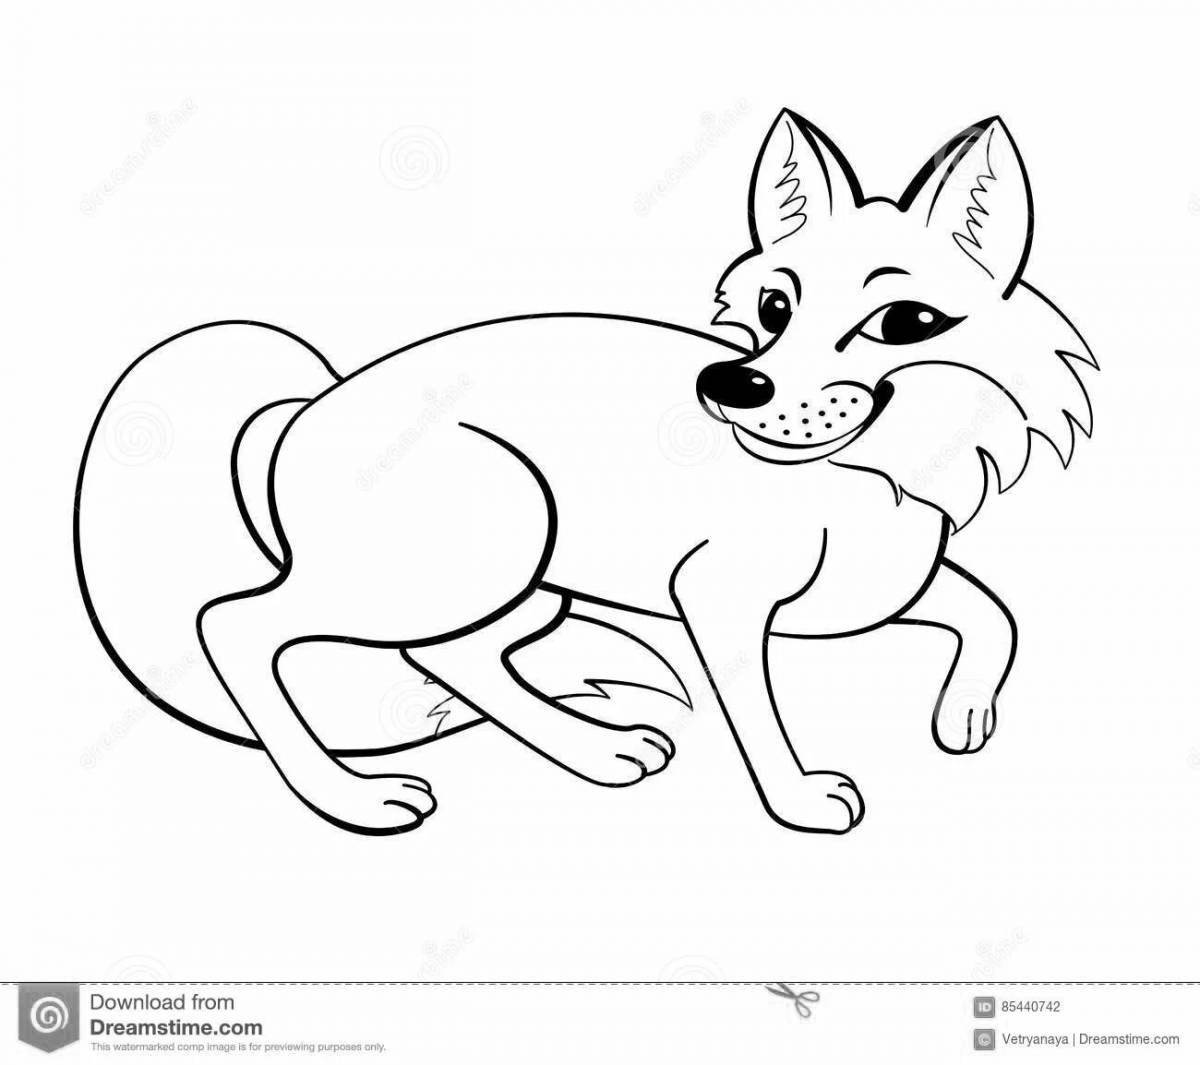 Coloring page daring cunning fox